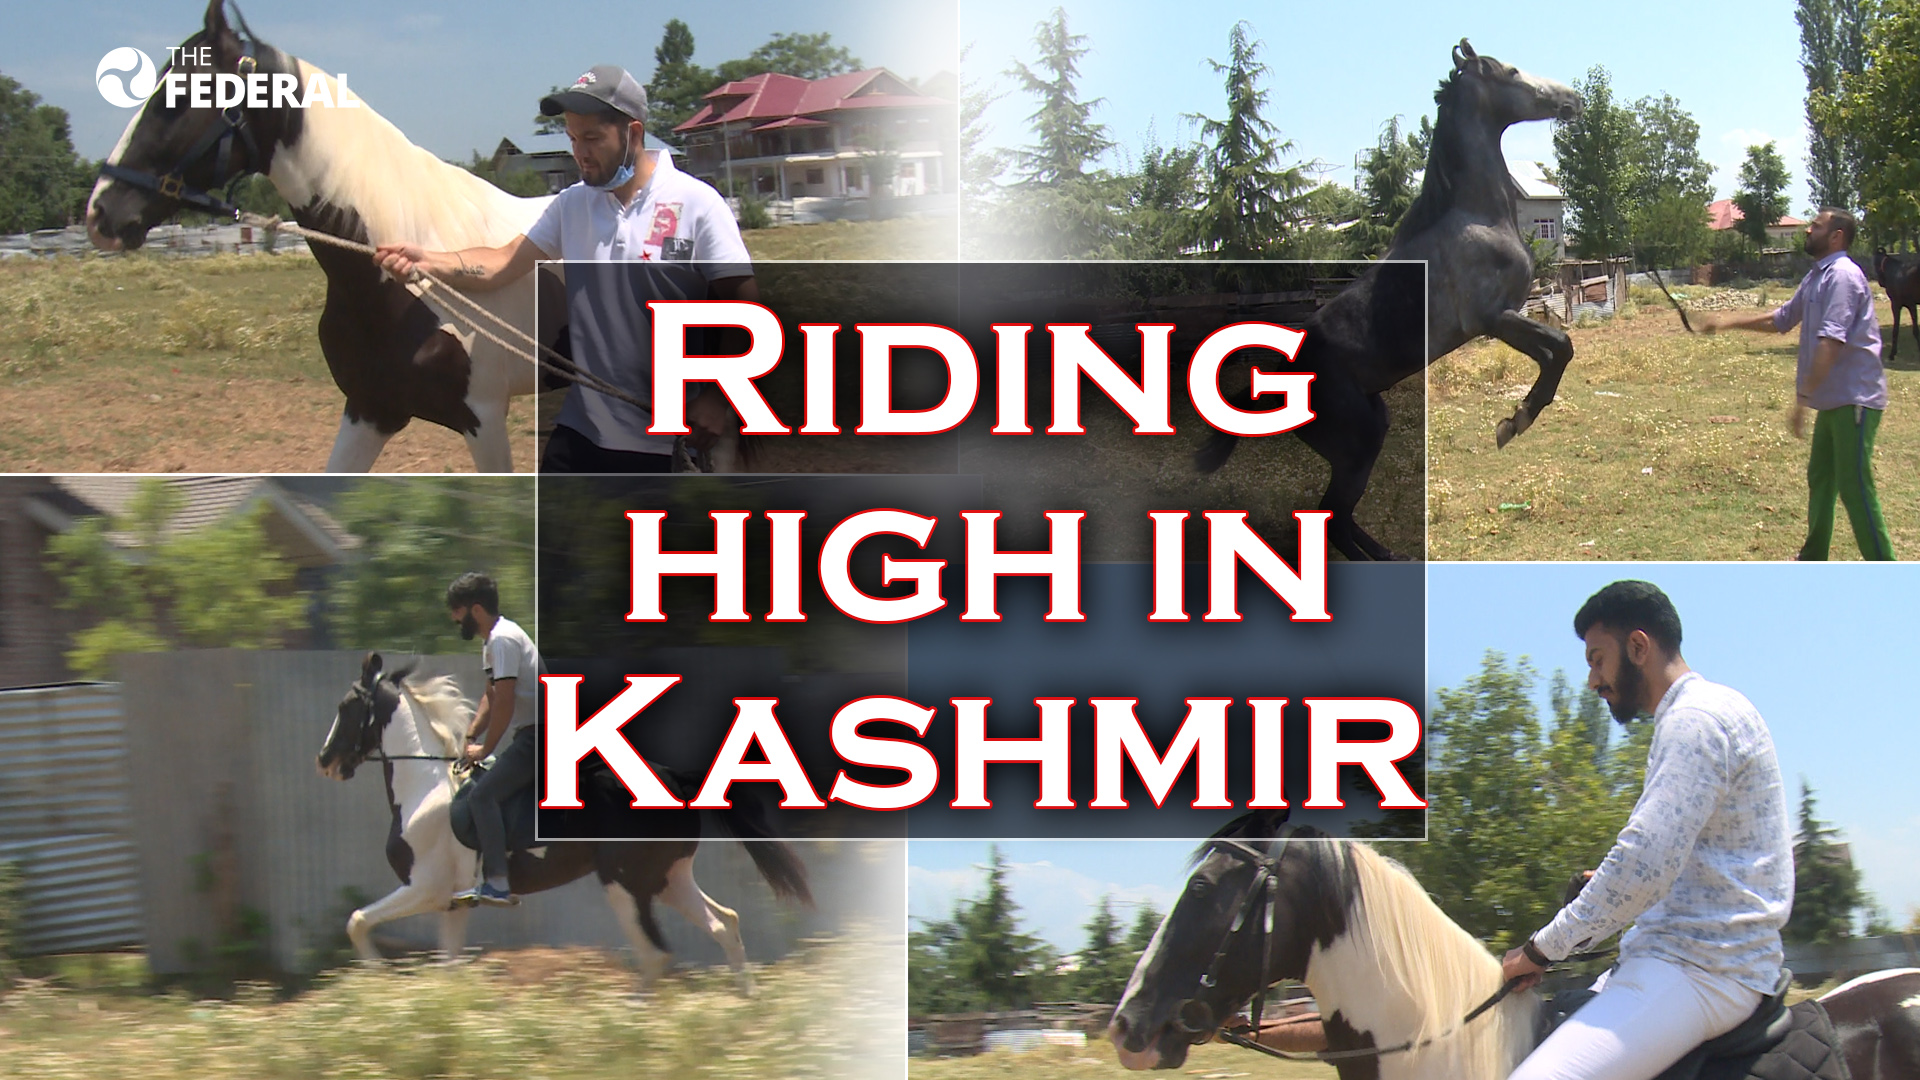 Kashmirs horse farm: A novel attraction for riders